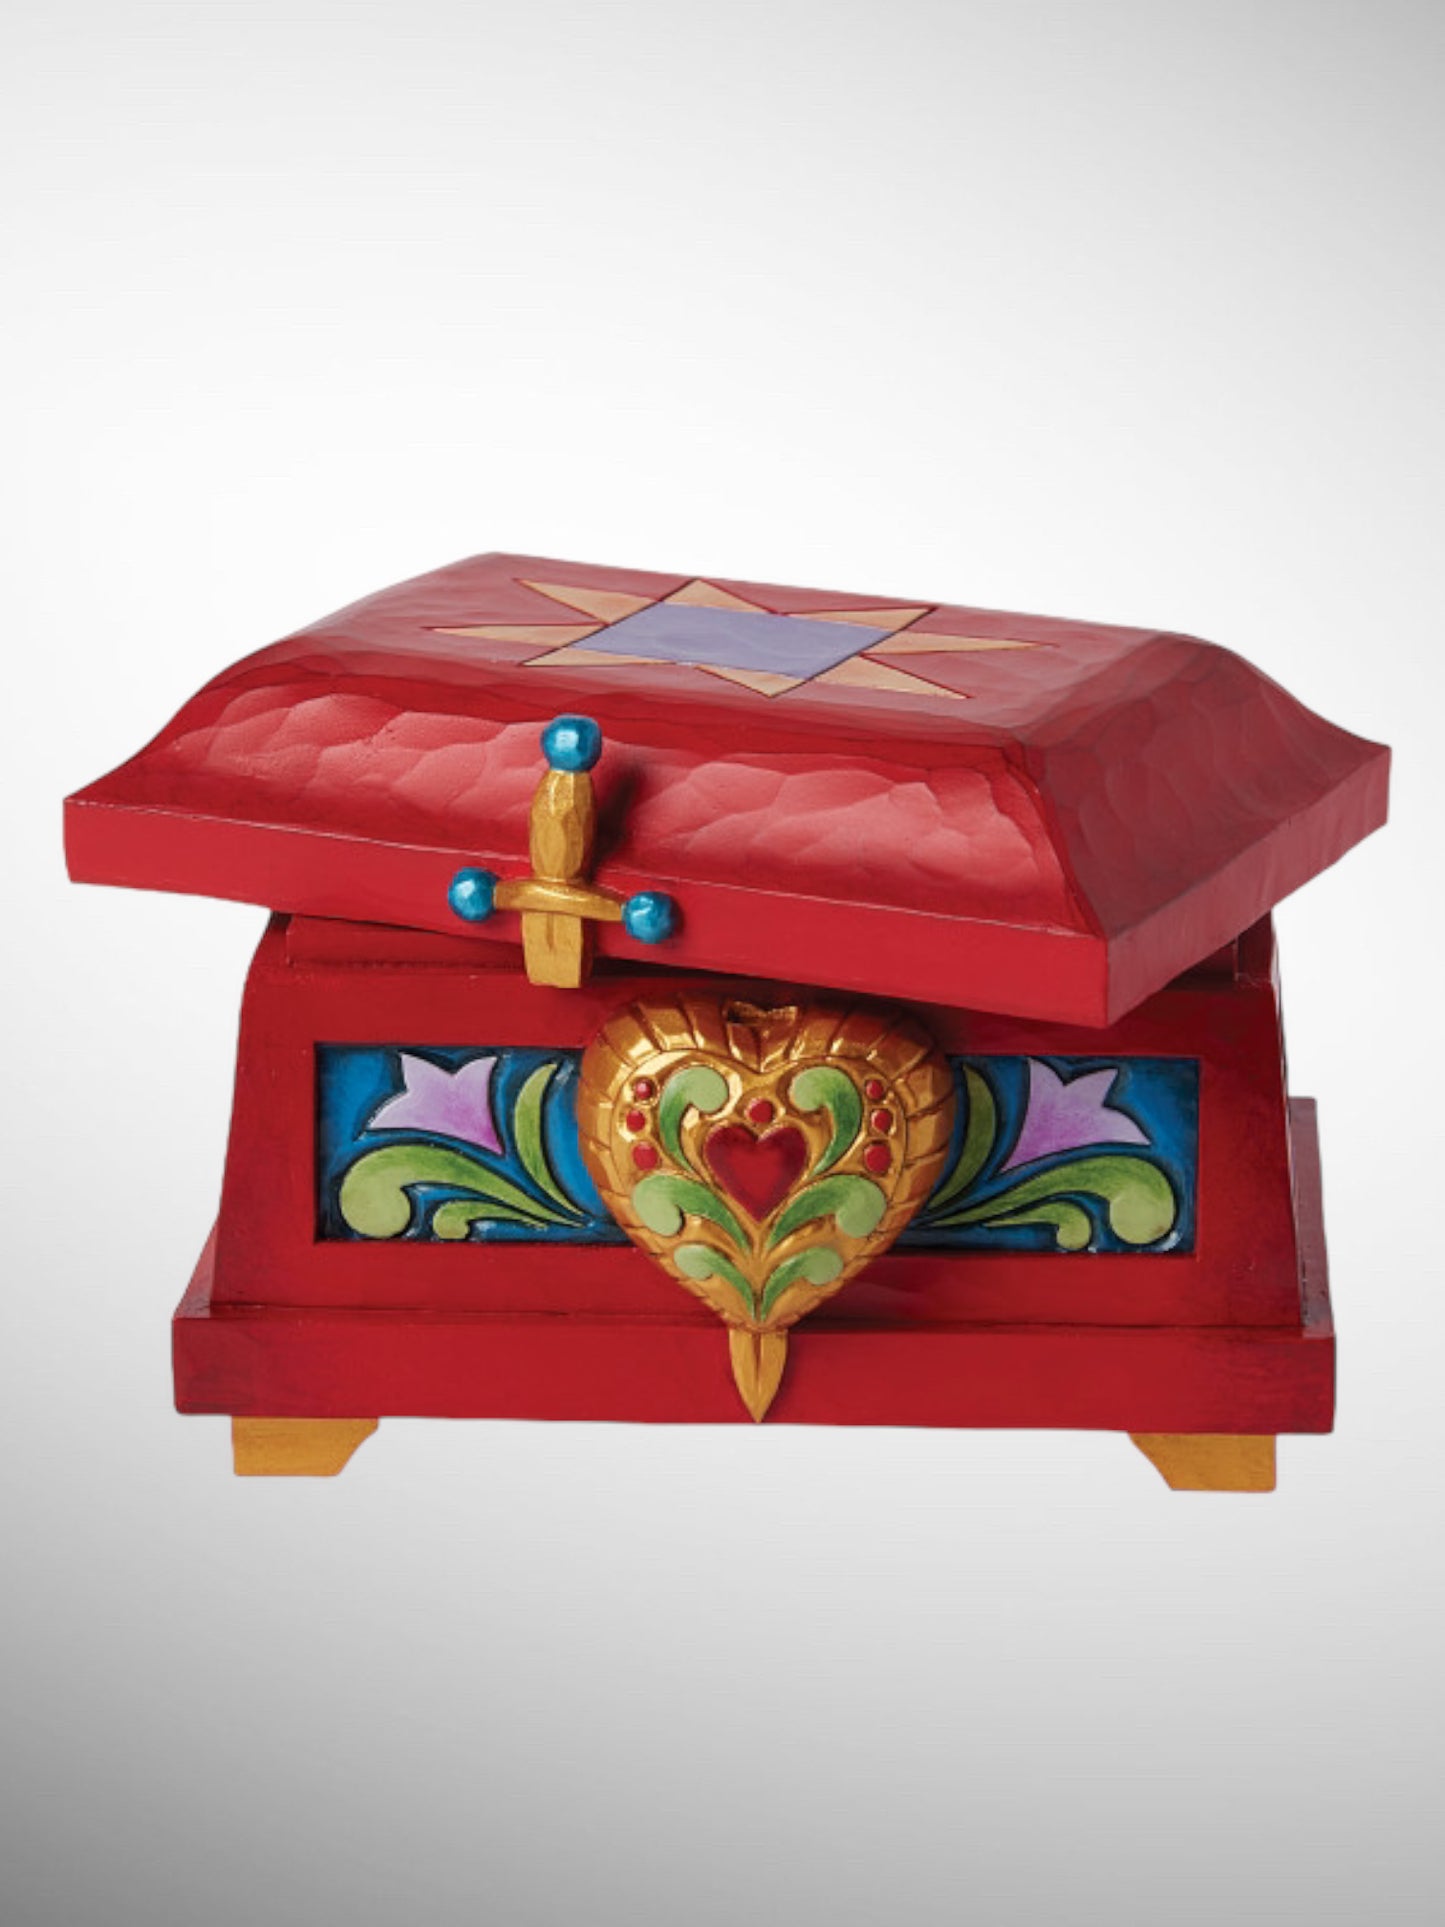 Jim Shore Disney Traditions - Who is the Fairest One of All? Snow White Queen's Trinket Box Figurine - PREORDER